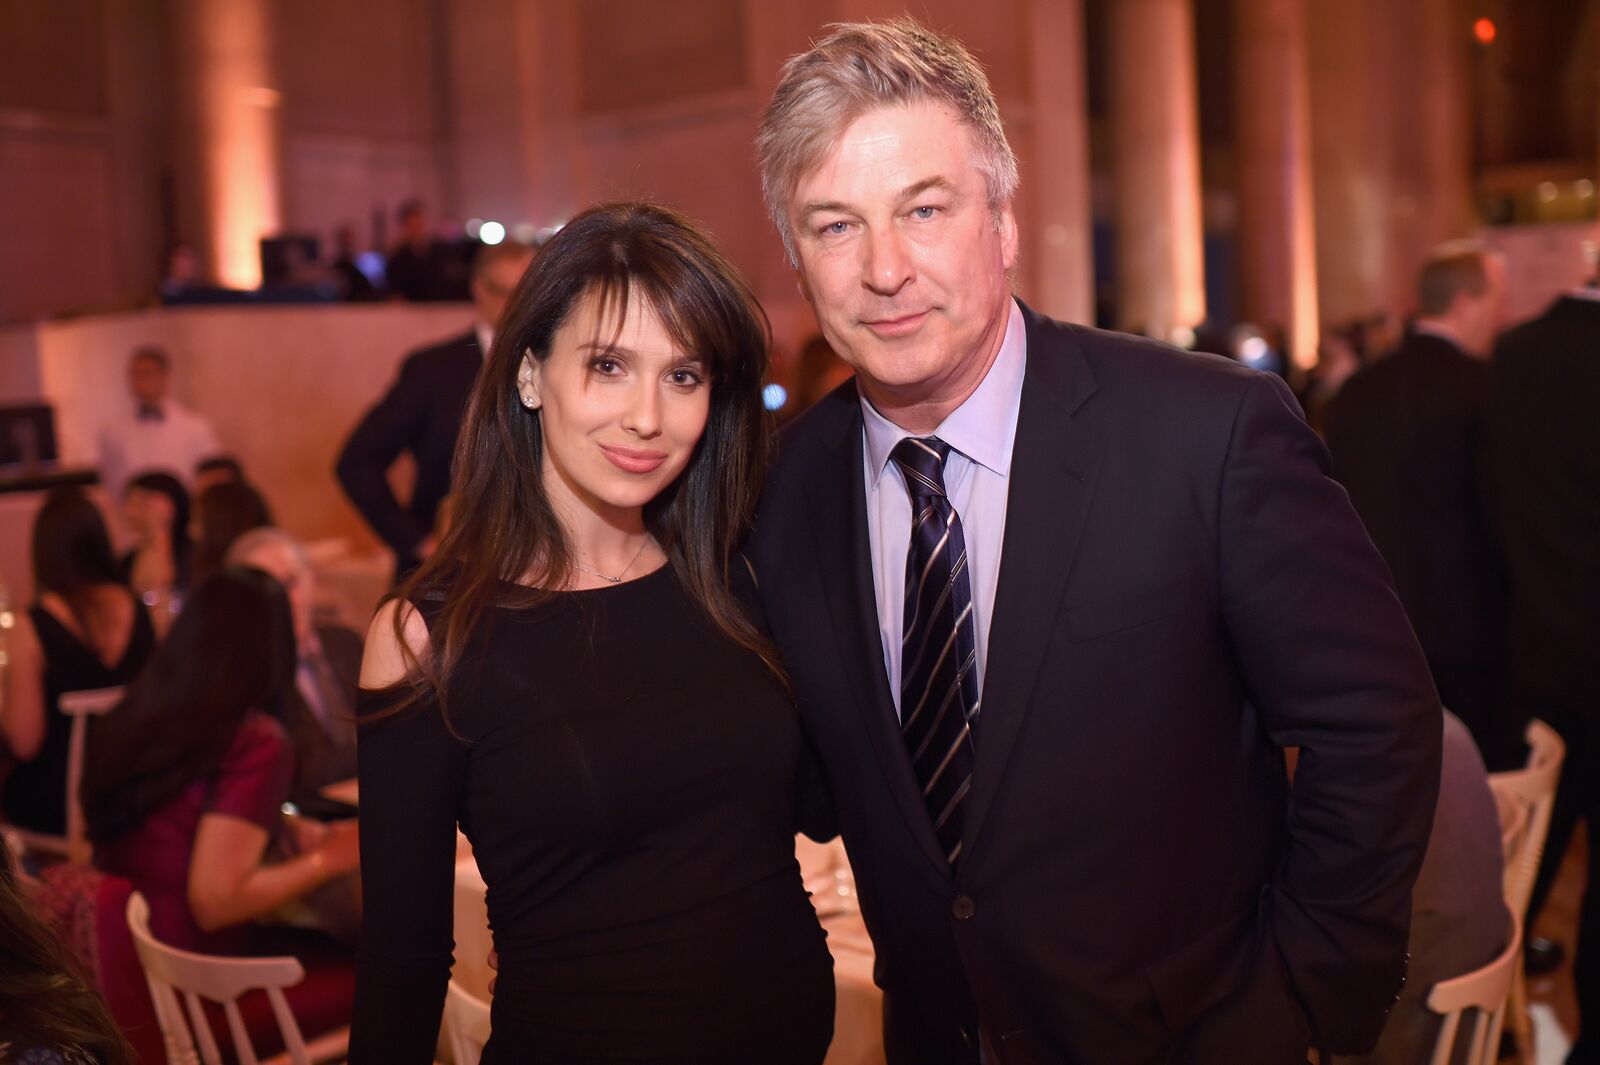 Hilaria Baldwin (L) and actor Alec Baldwin attend Stand Up To Cancer's New York Standing Room Only,on April 9, 2016 | Photo: Getty Images